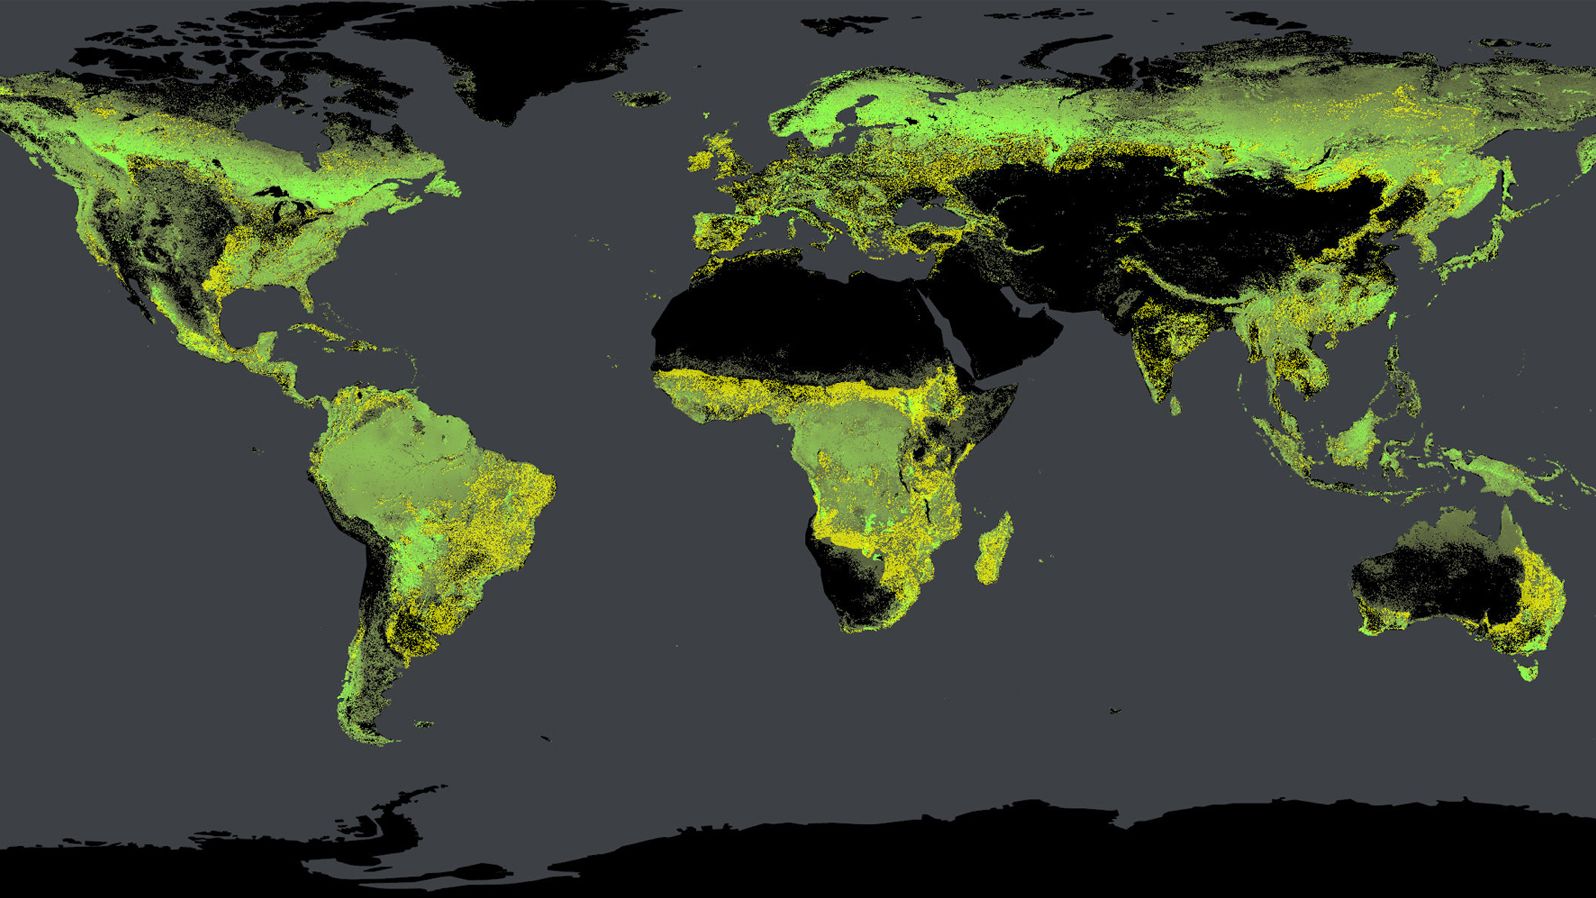 Global tree density, calculated by Crowther's team. Existing forests are shown in green, potential forests are yellow.